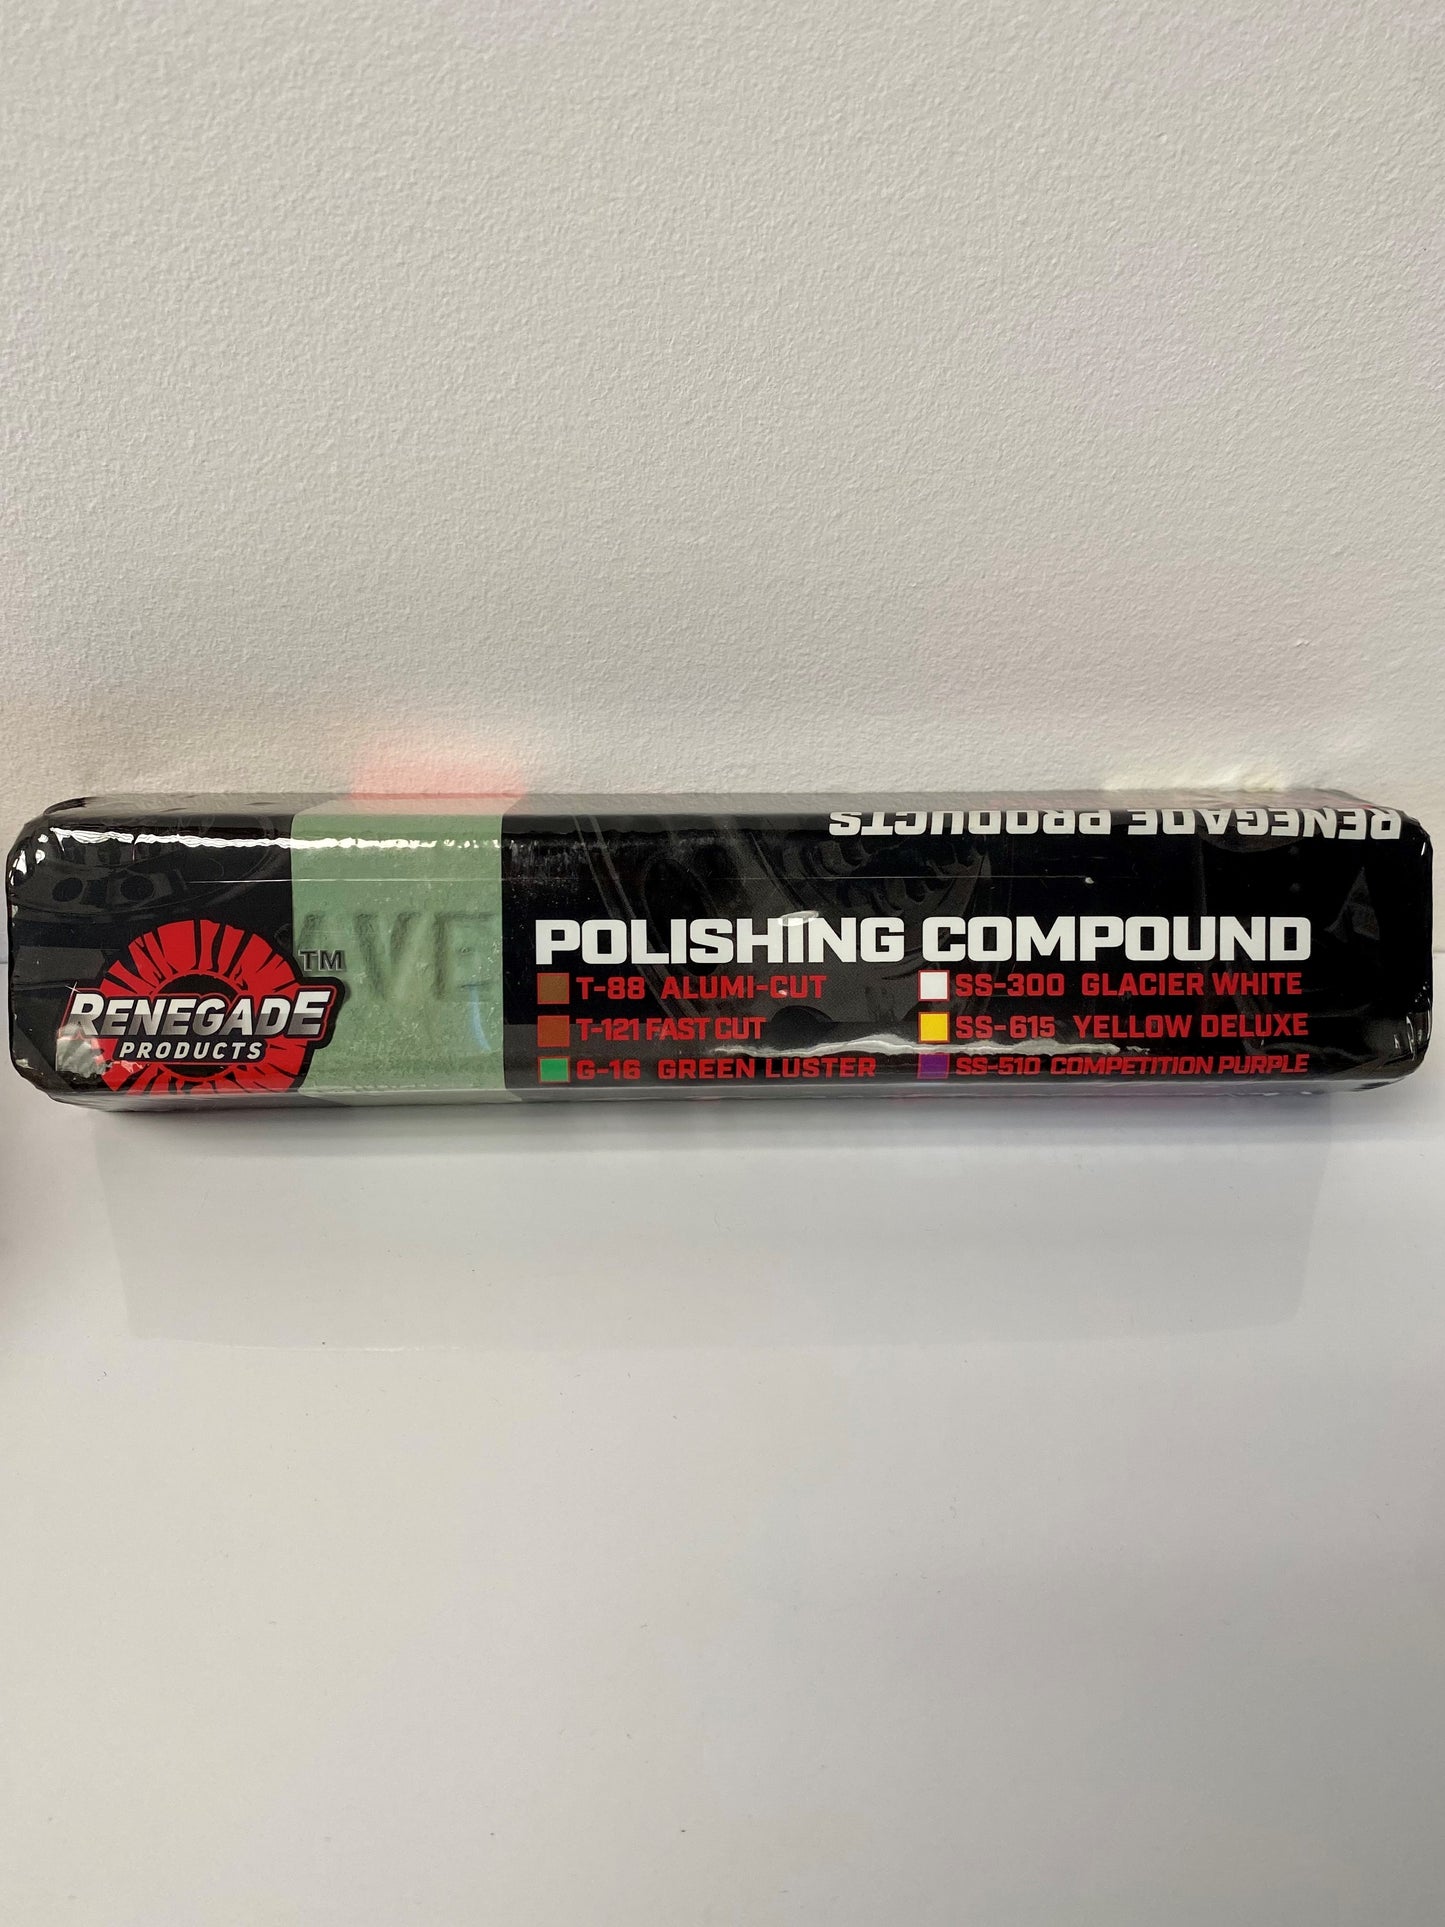 Renegade Metal Polishing Compound for Buffing Wheels – flattoptransport